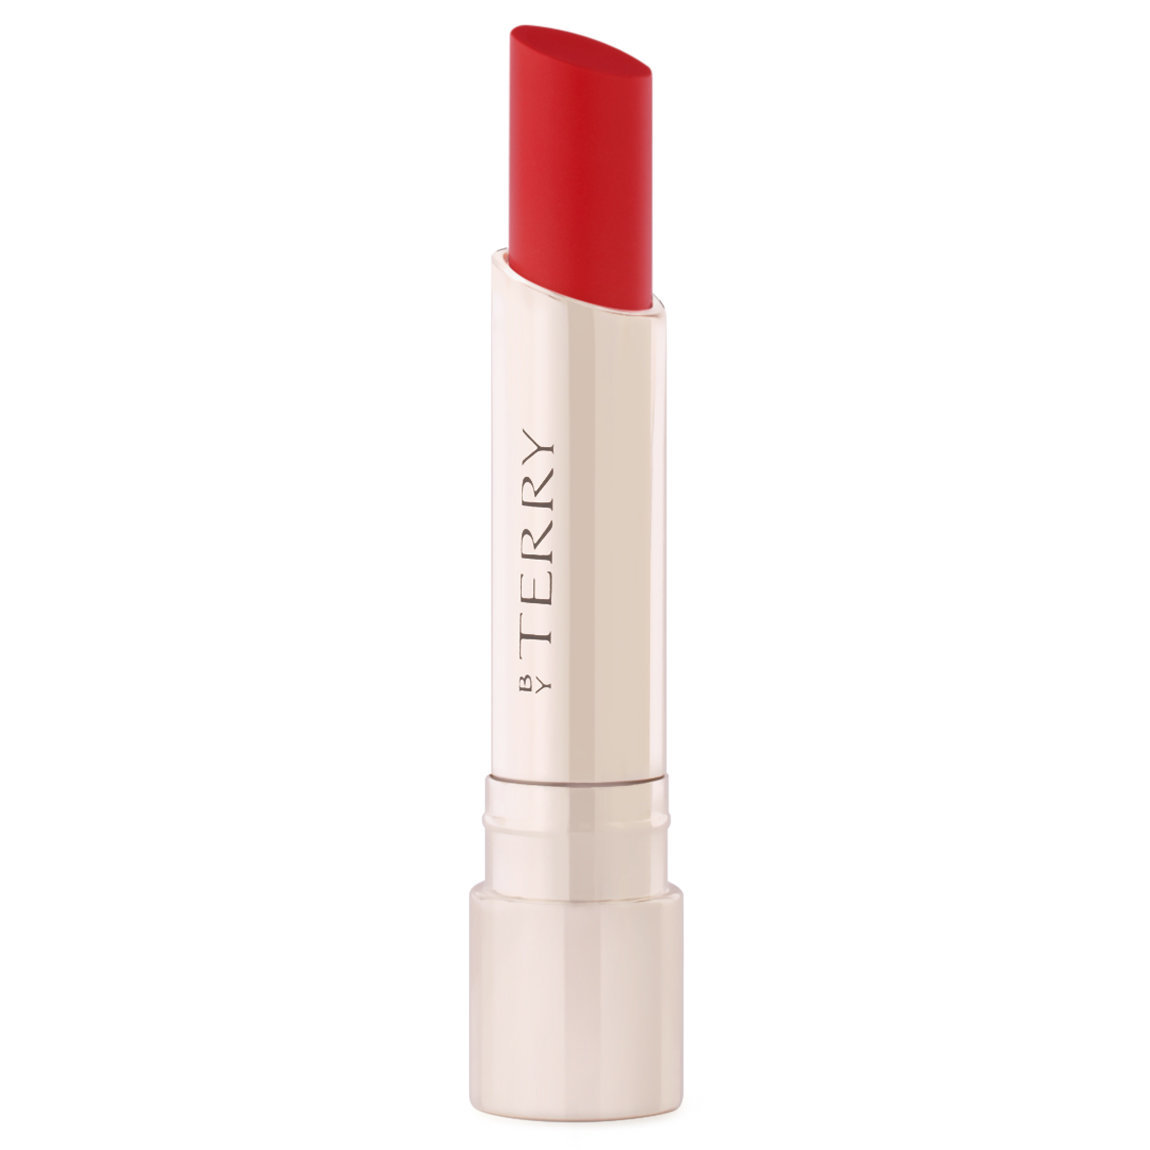 BY TERRY Hyaluronic Sheer Rouge Hydra-Balm Fill & Plump Lipstick 7 Bang Bang alternative view 1.